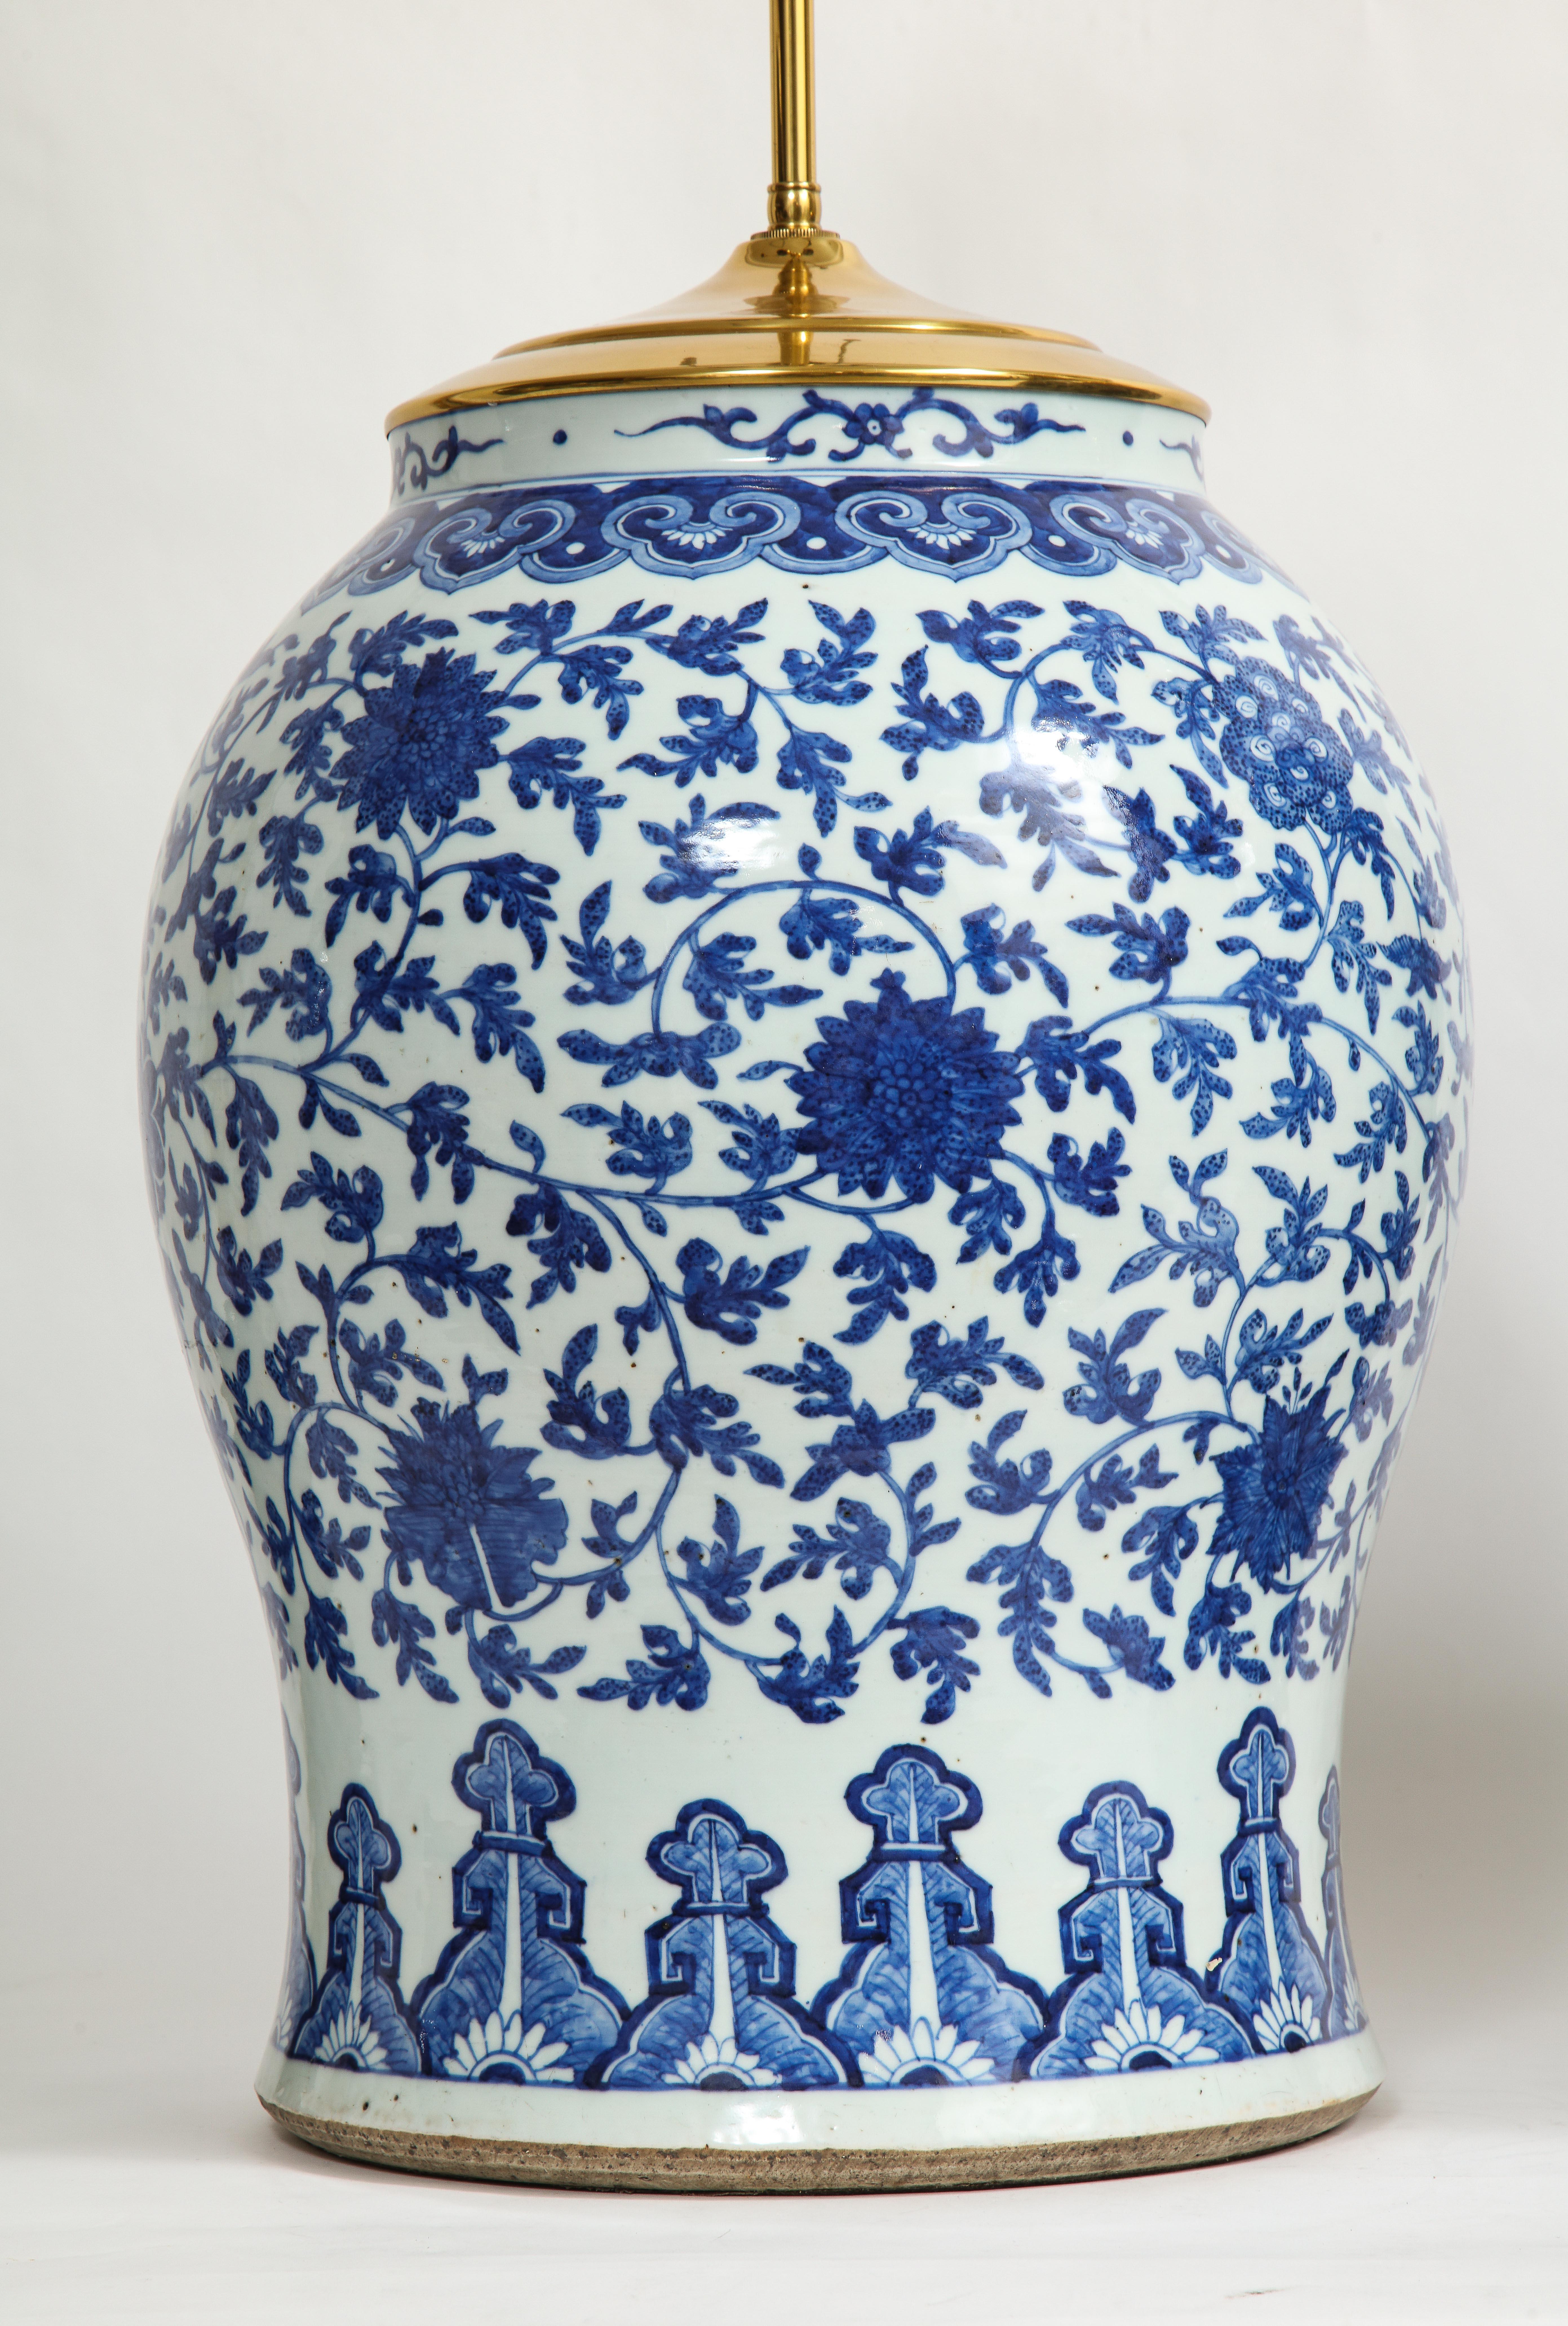 Pair of 19th Century Qing Dynasty Chinese Blue and White Vases Turned to Lamps For Sale 7